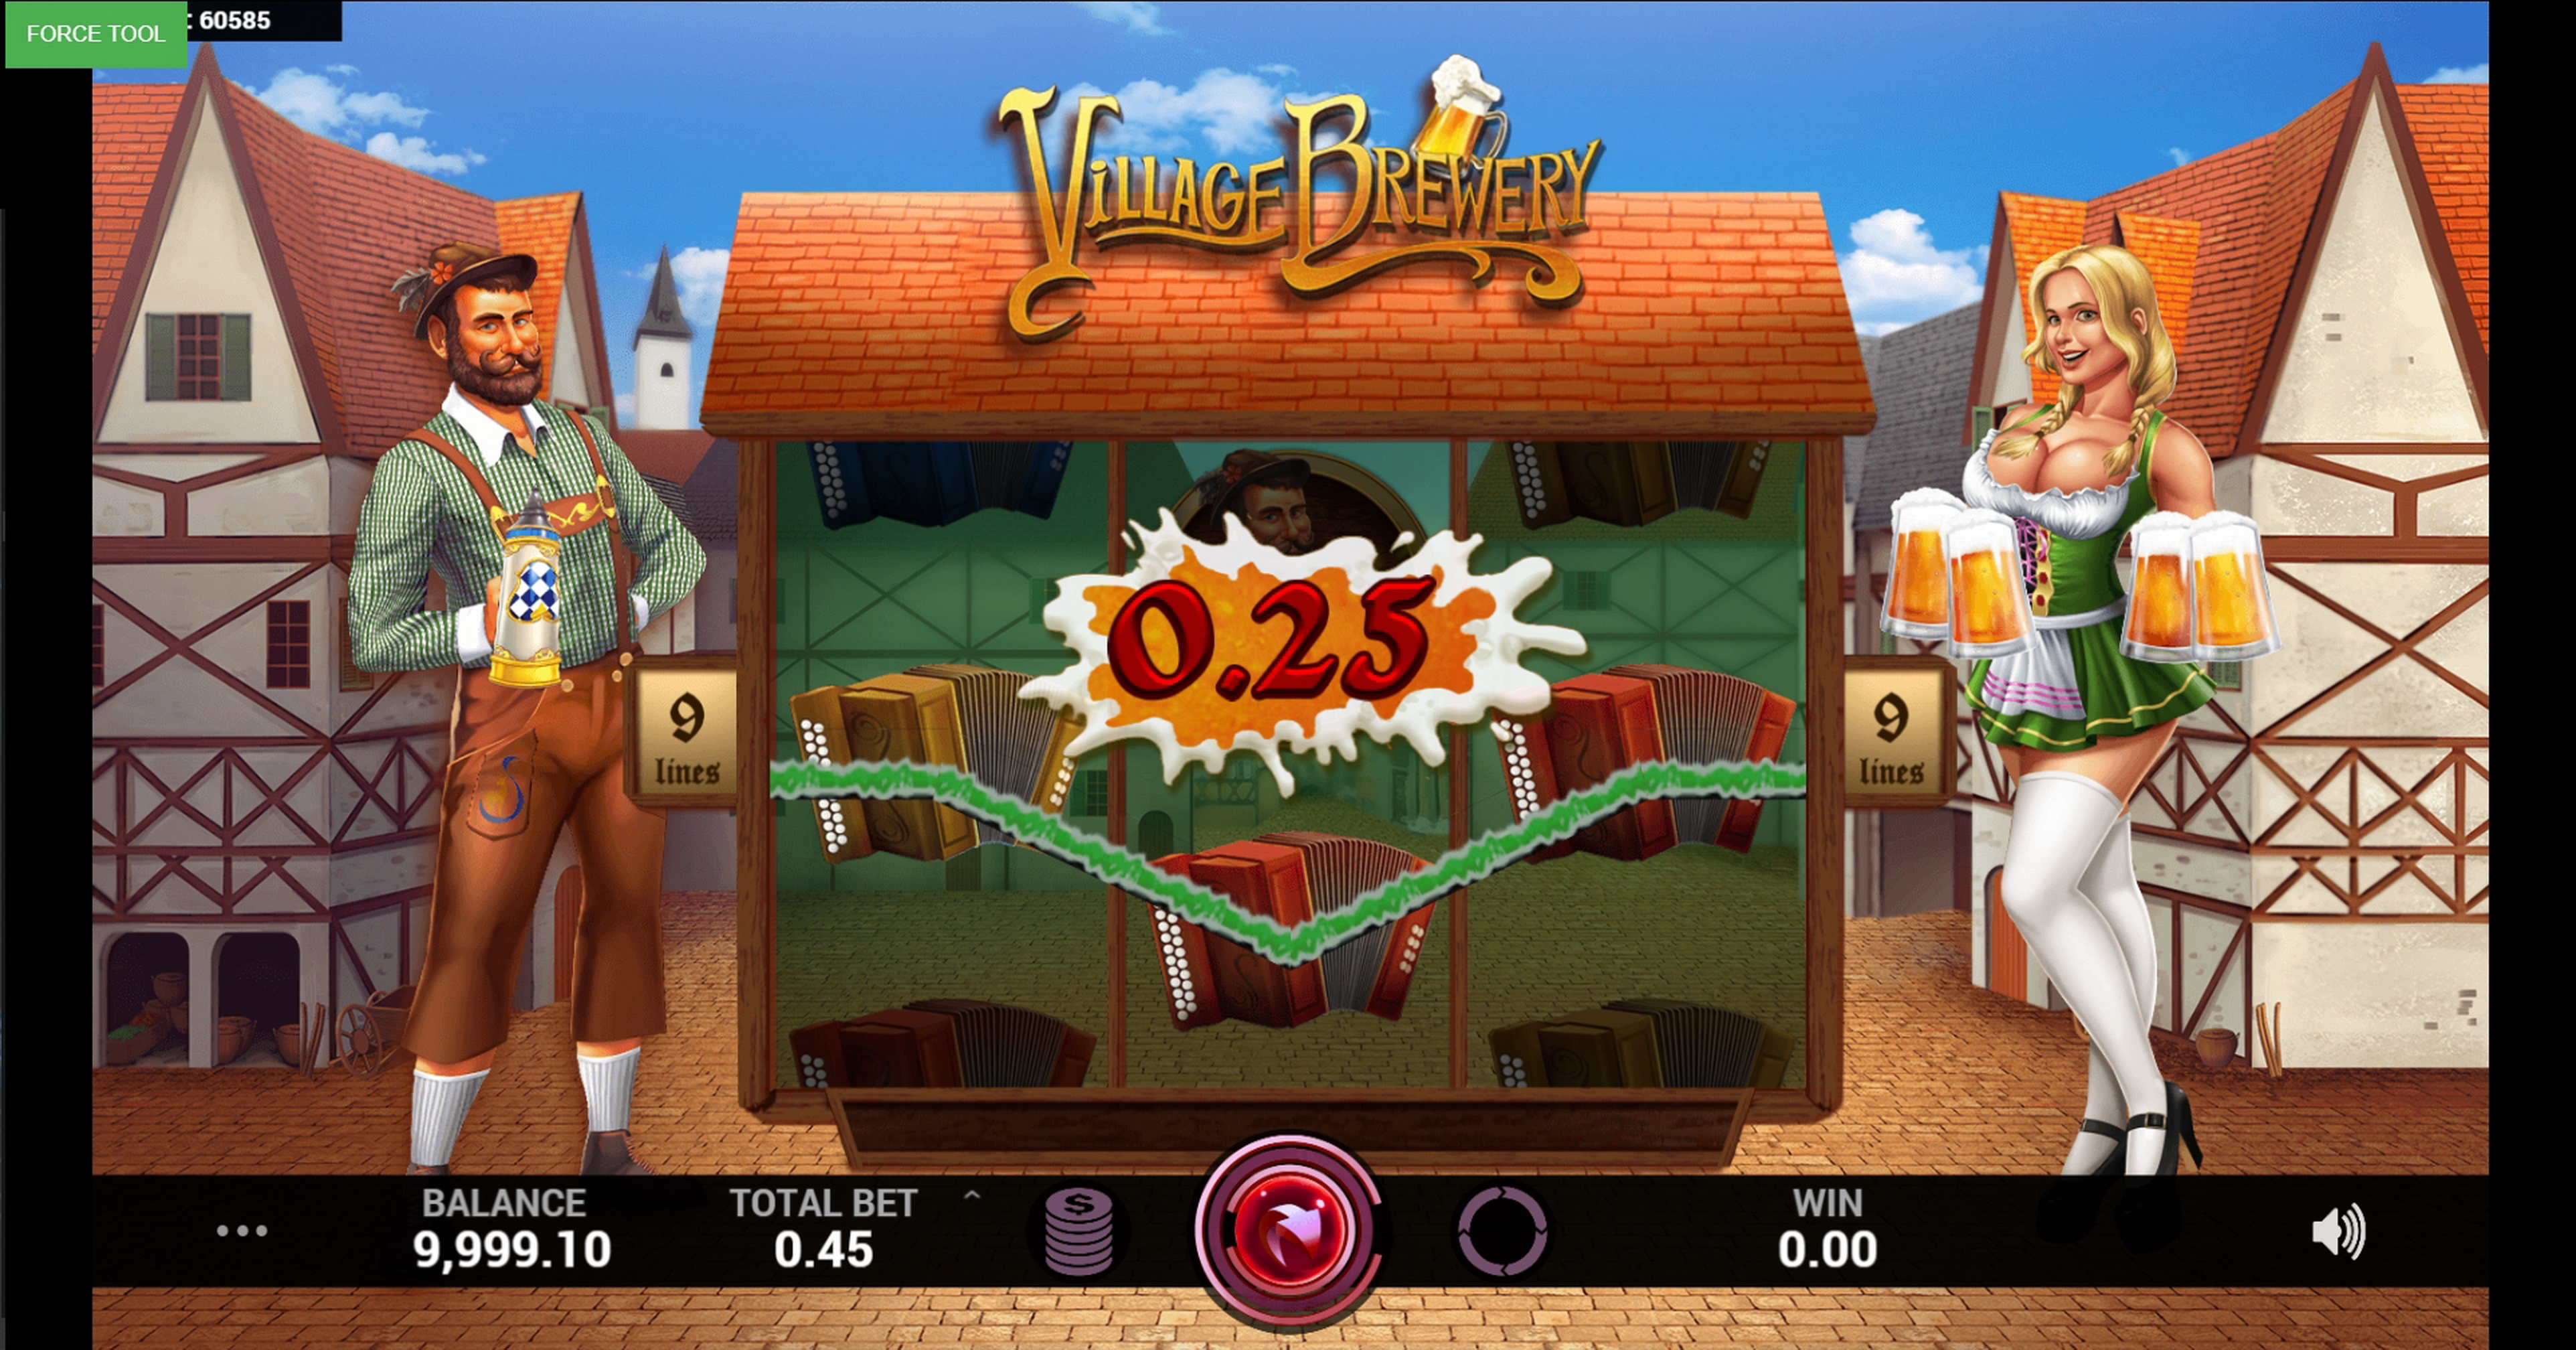 Win Money in Village Brewery Free Slot Game by Caleta Gaming